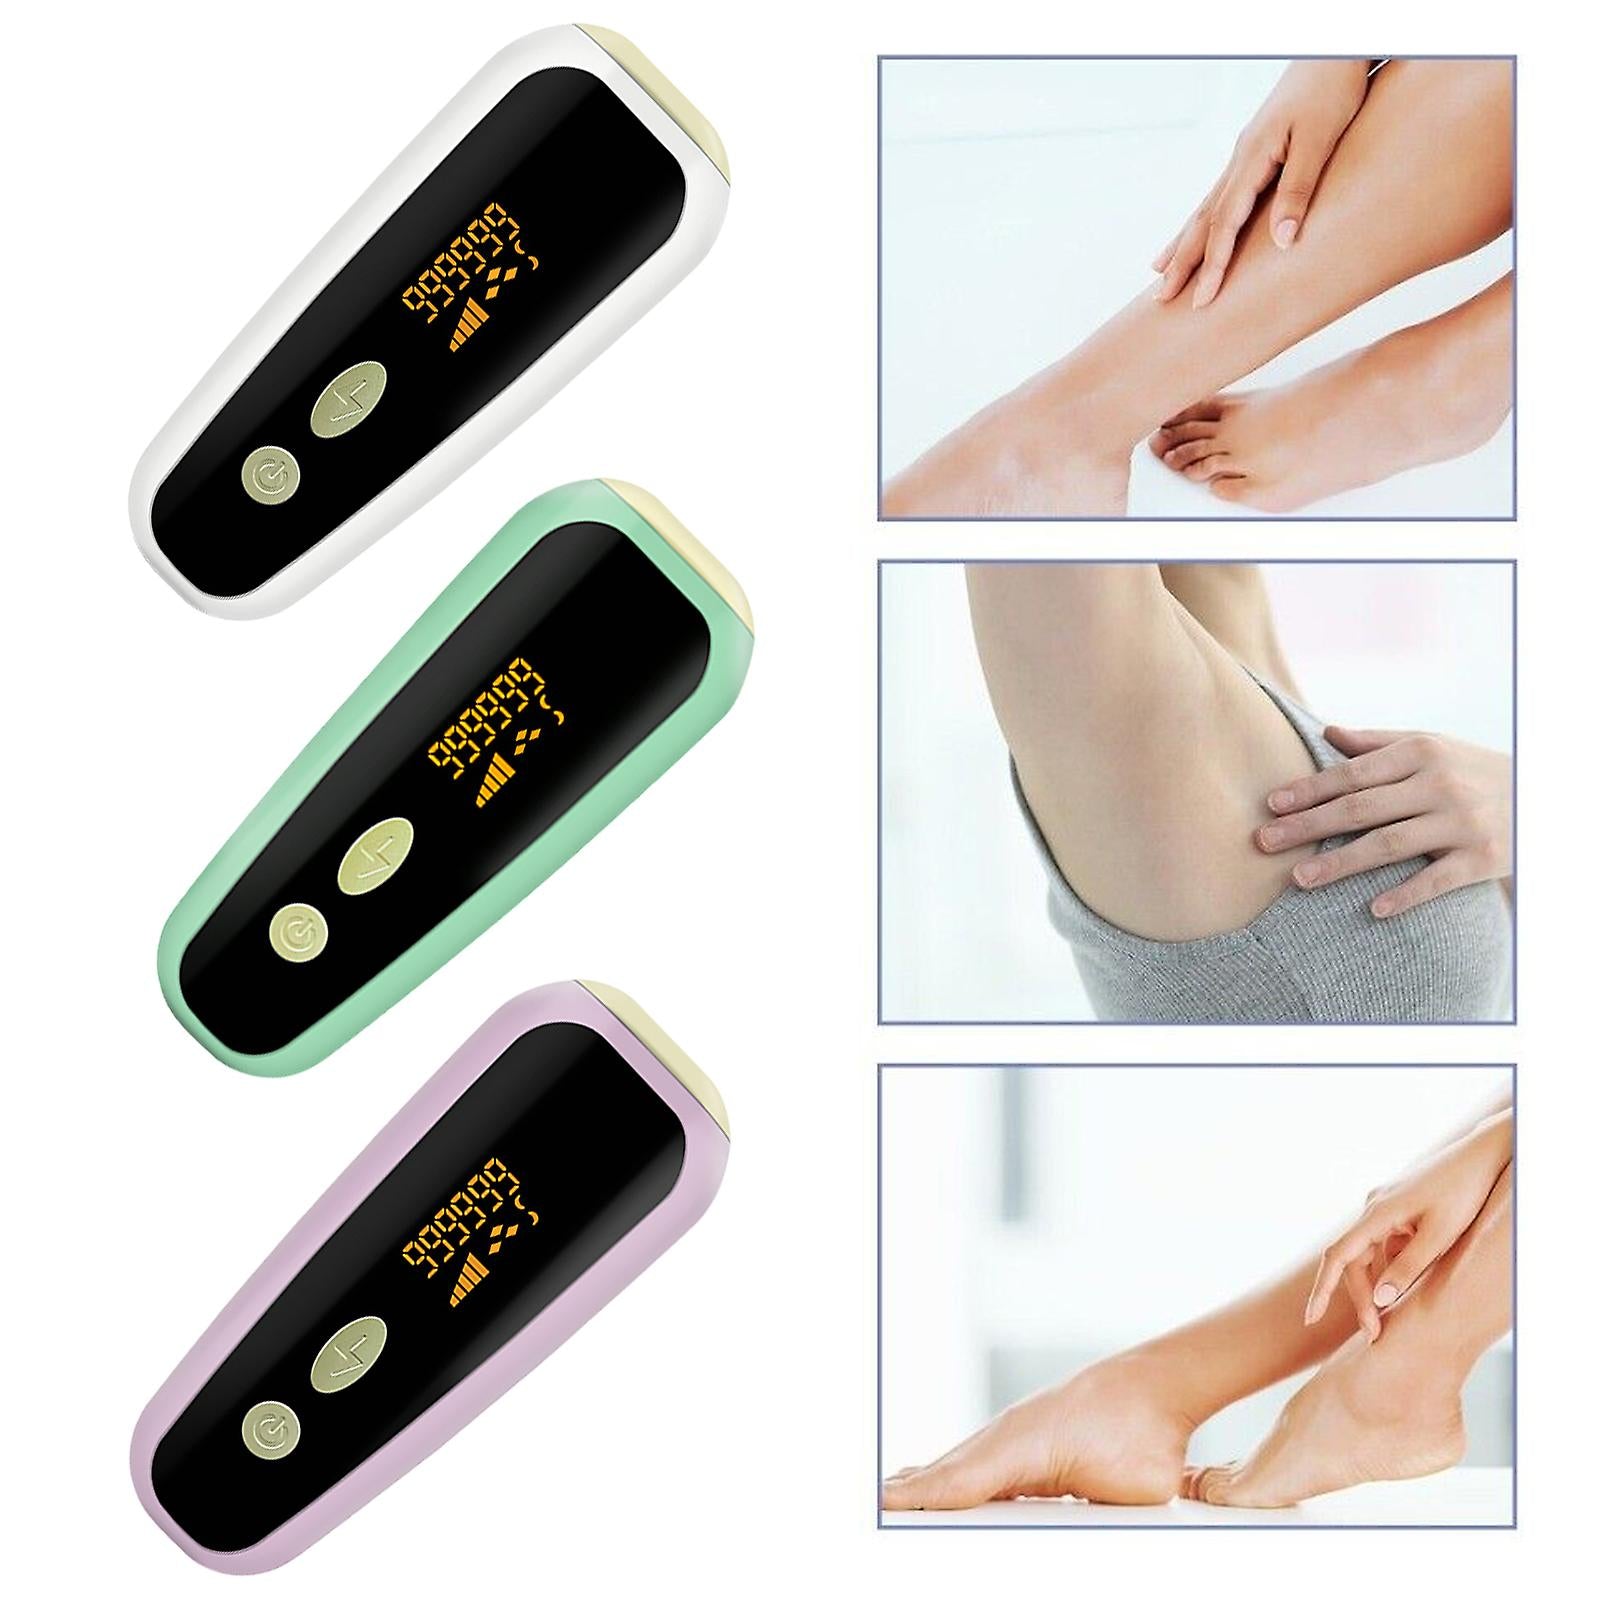 (NET) Ipl Painless Laser Removal Hair 999 999 Flashes Permanent Body Epilator Device